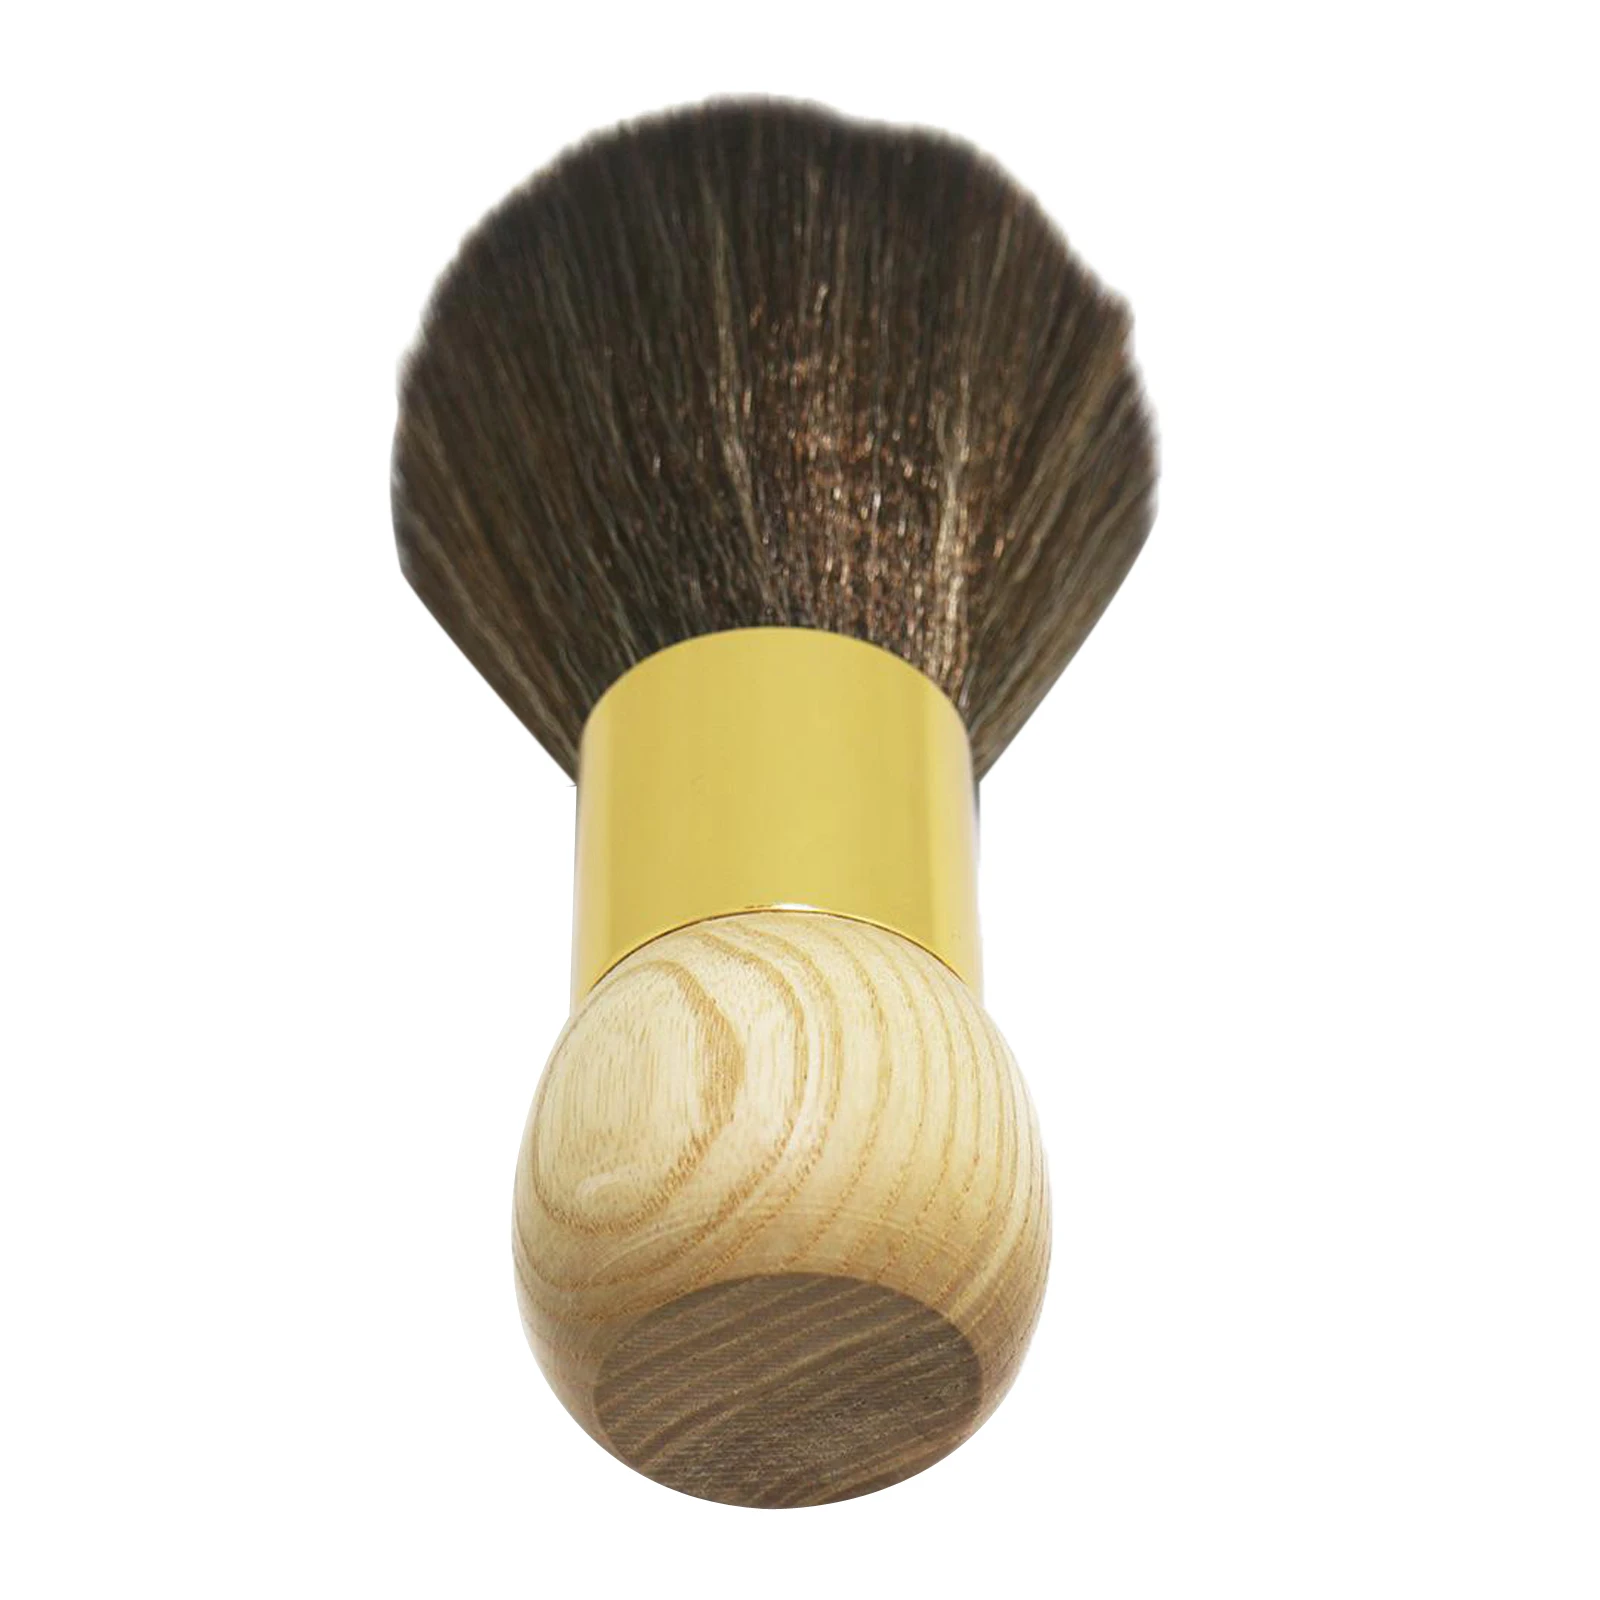 Wooden Hairbrush Haircut for Salon Barber Cleaning Remove Hair Clippings